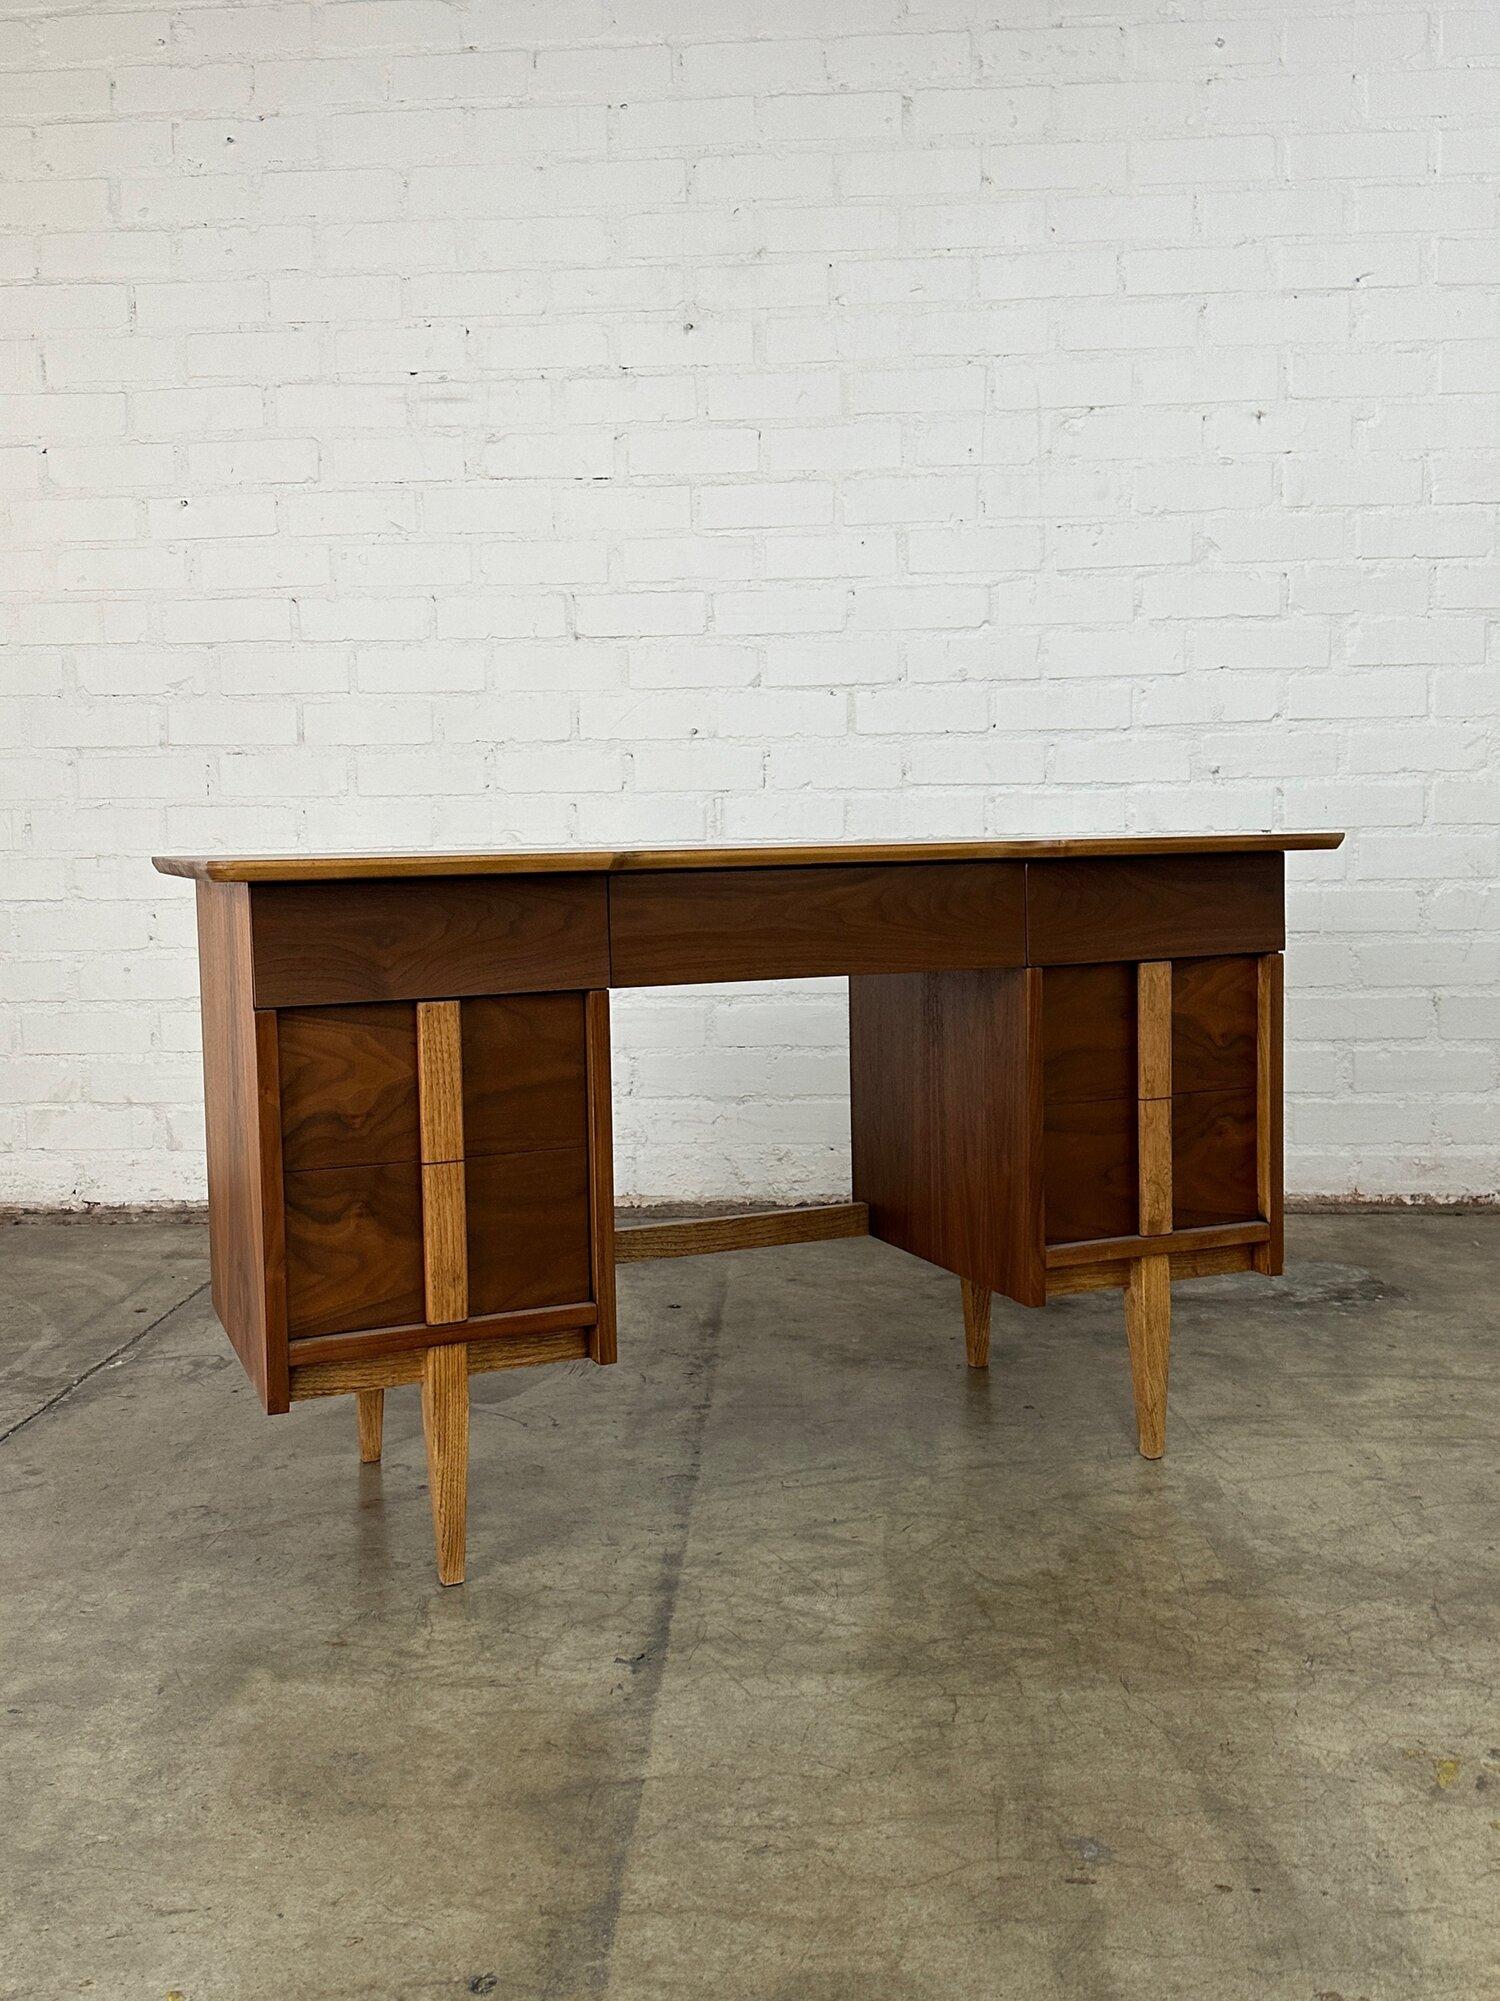 W52.5 D23.25 H30 KNEE CLEARANCE 24 KNEE WIDTH 19.5

Fully restored walnut and oak desk circa 1960s. Item shows well with no major areas of wear. Item features exceptional grain throughout, sculoted handles, and is finished on all sides. Desk is